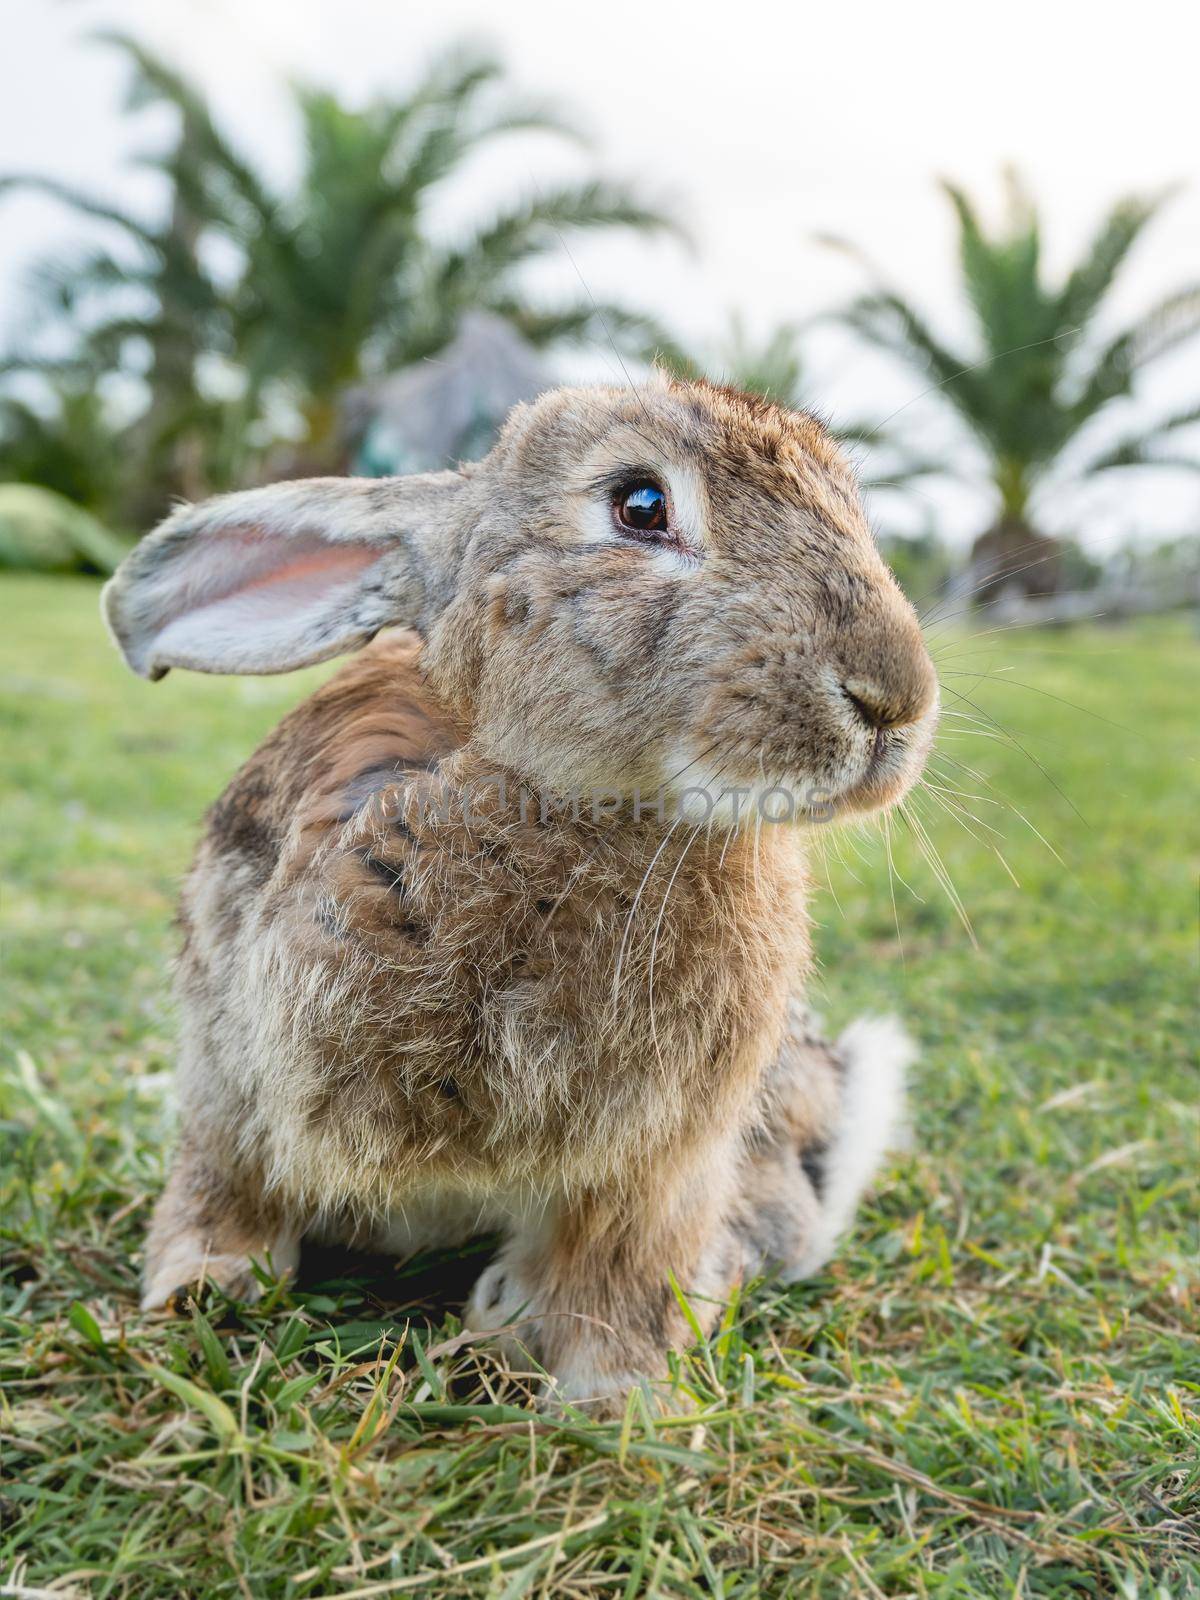 Portrait of cute bunny on lawn. Fluffy rabbit on green grass is staring in camera. Farm animal is grazing on field outdoors.